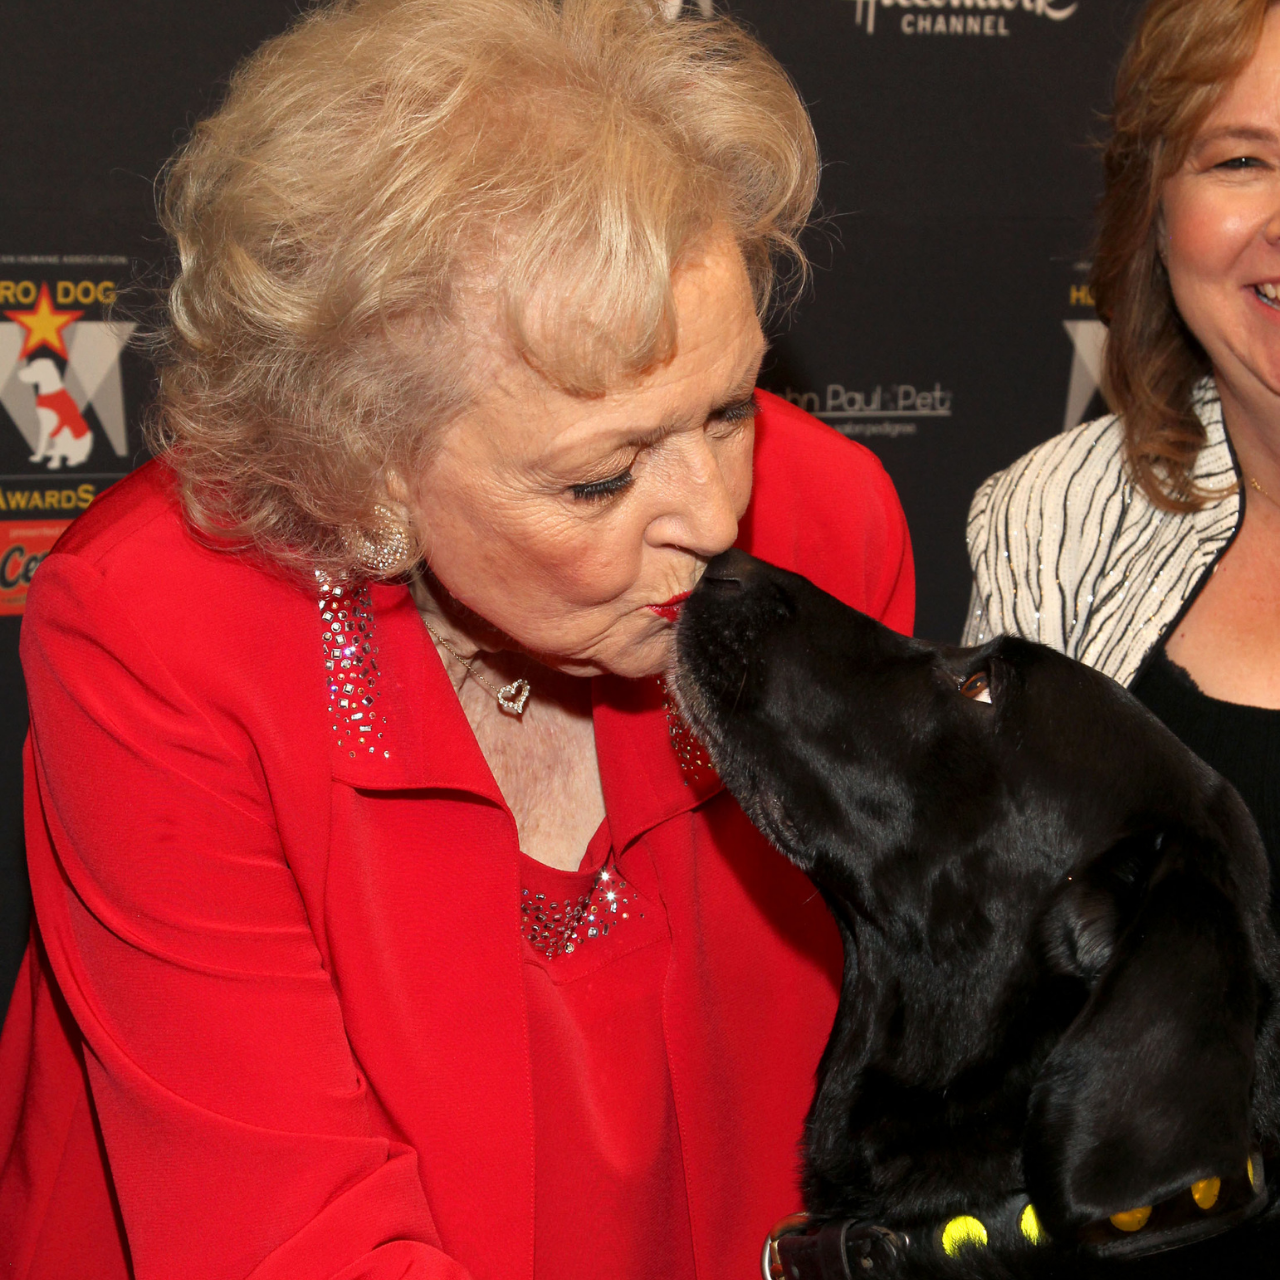 Betty White attends the American Humane Association's Hero Dog Award opening ceremony